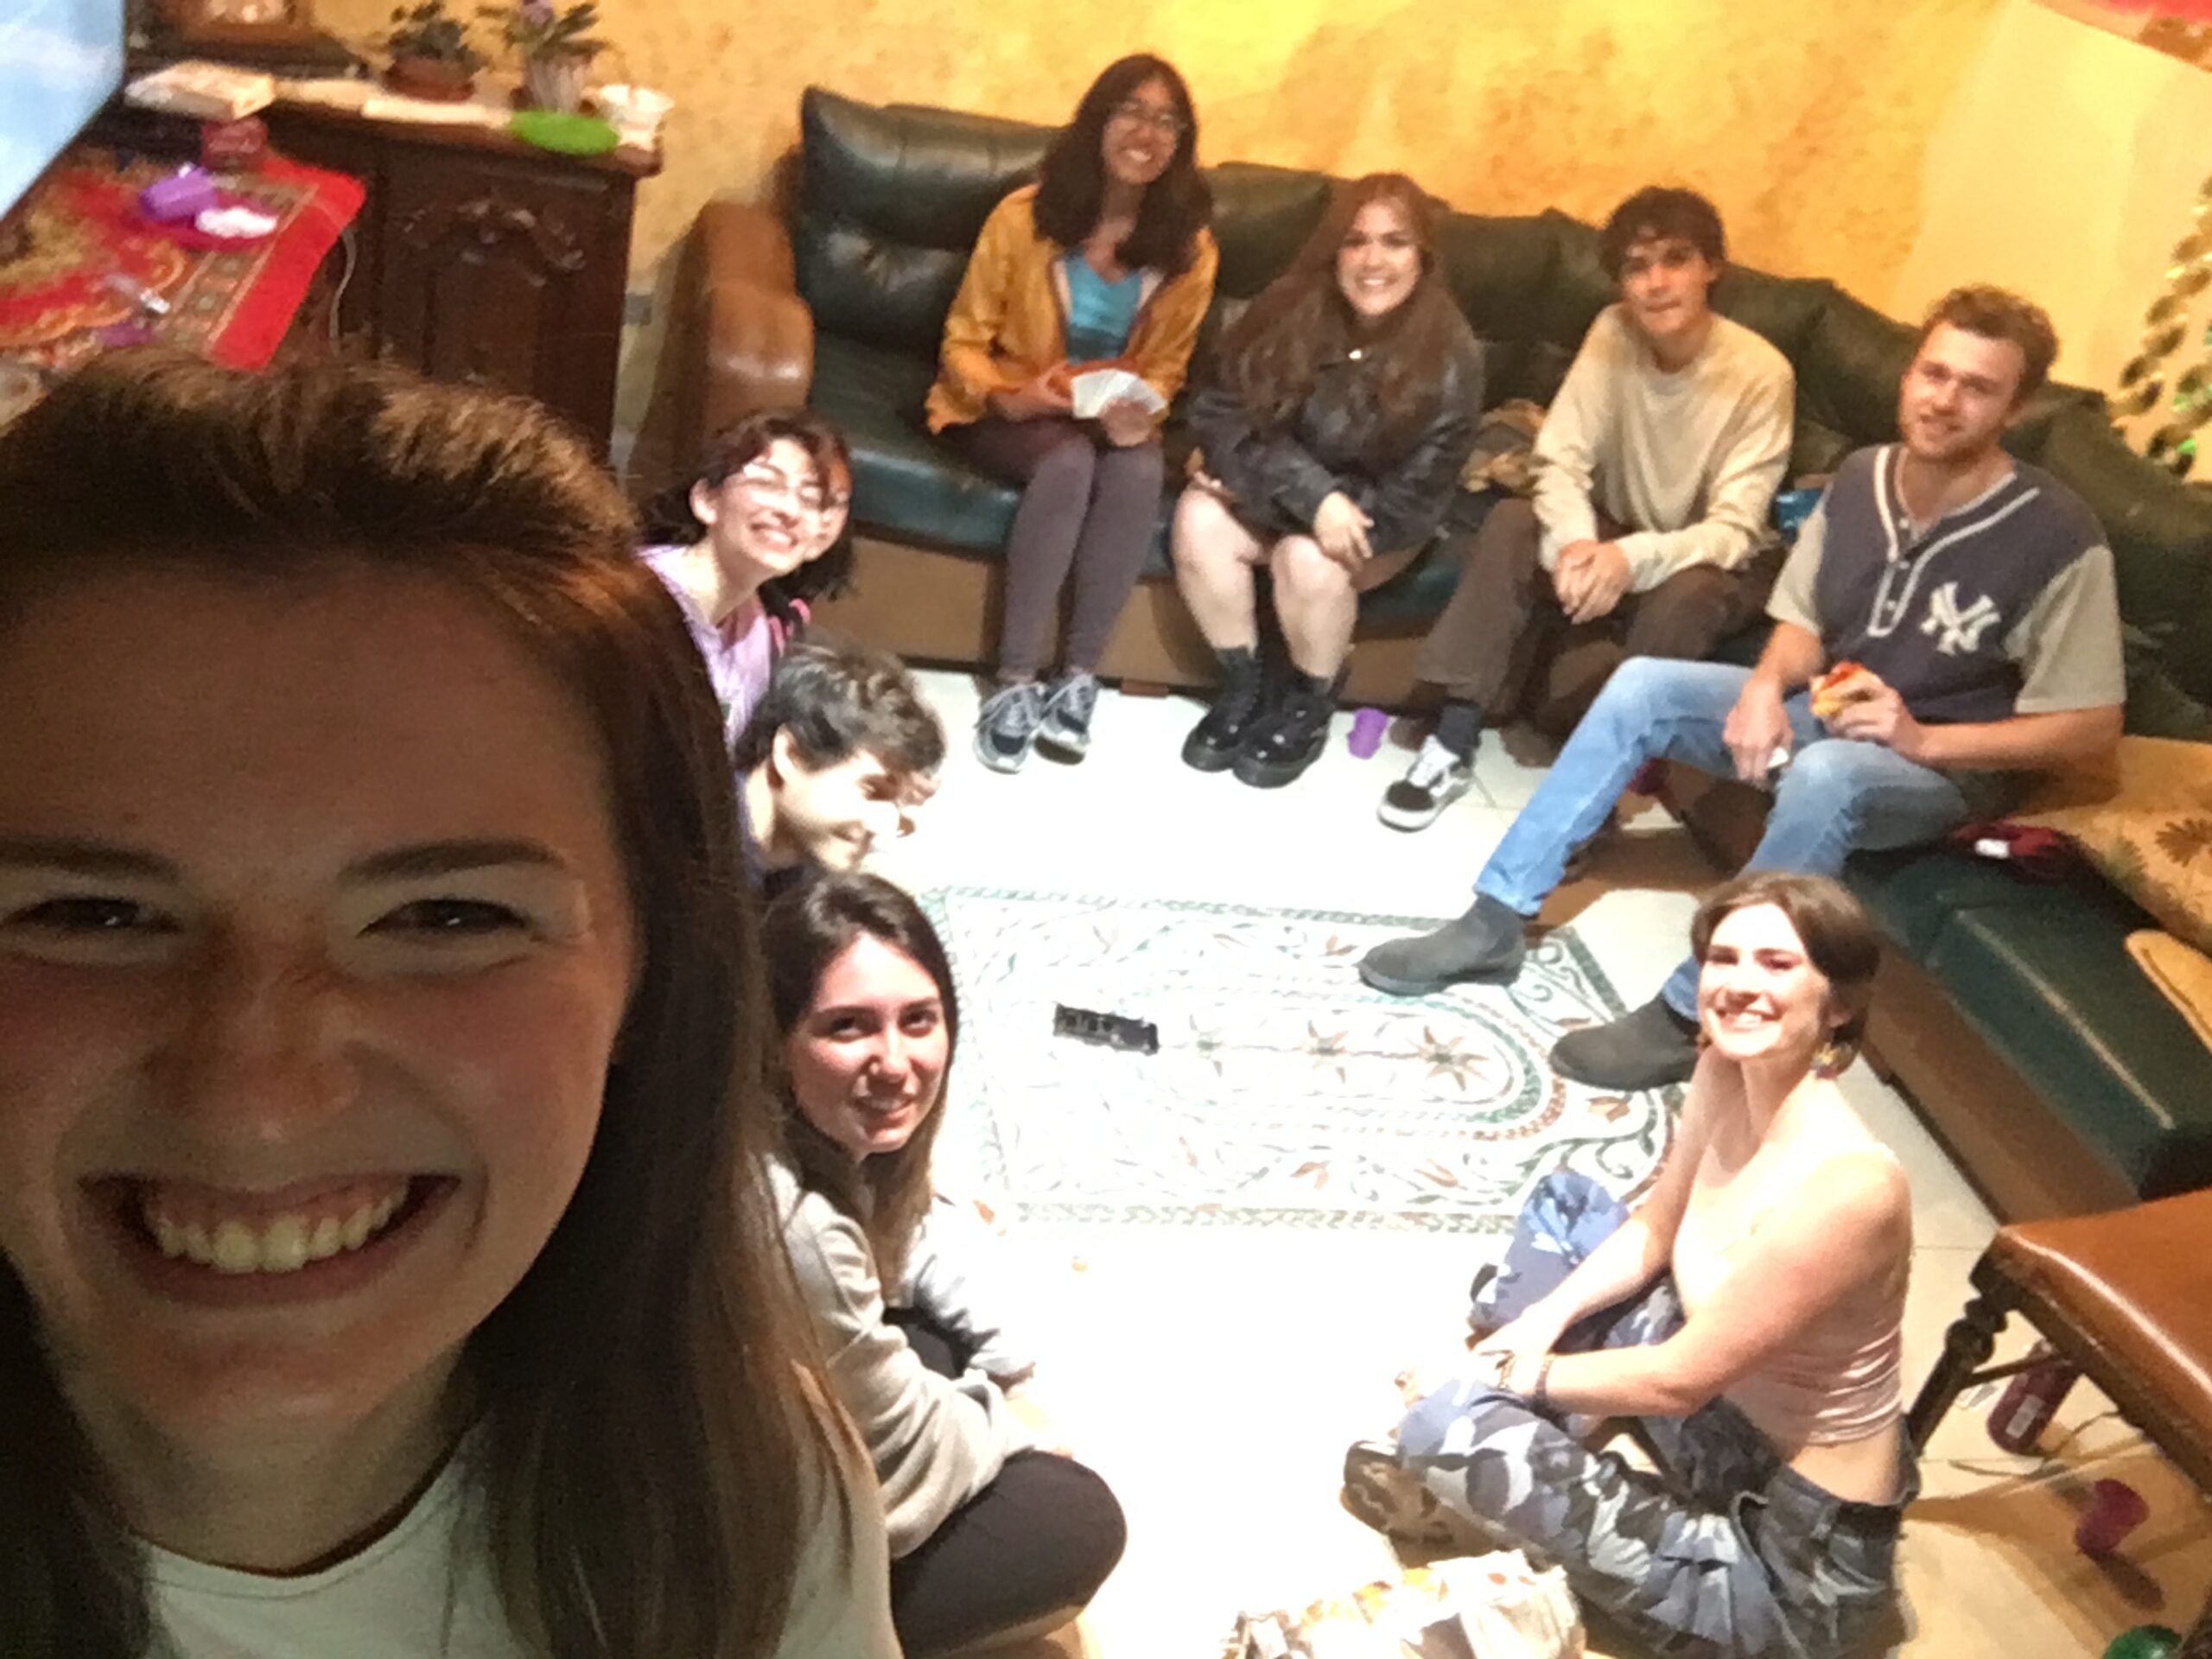 Pictured here is a selfie of myself with many of my international friends. All of us are sitting in a circle enjoying Ellie's birthday party. 